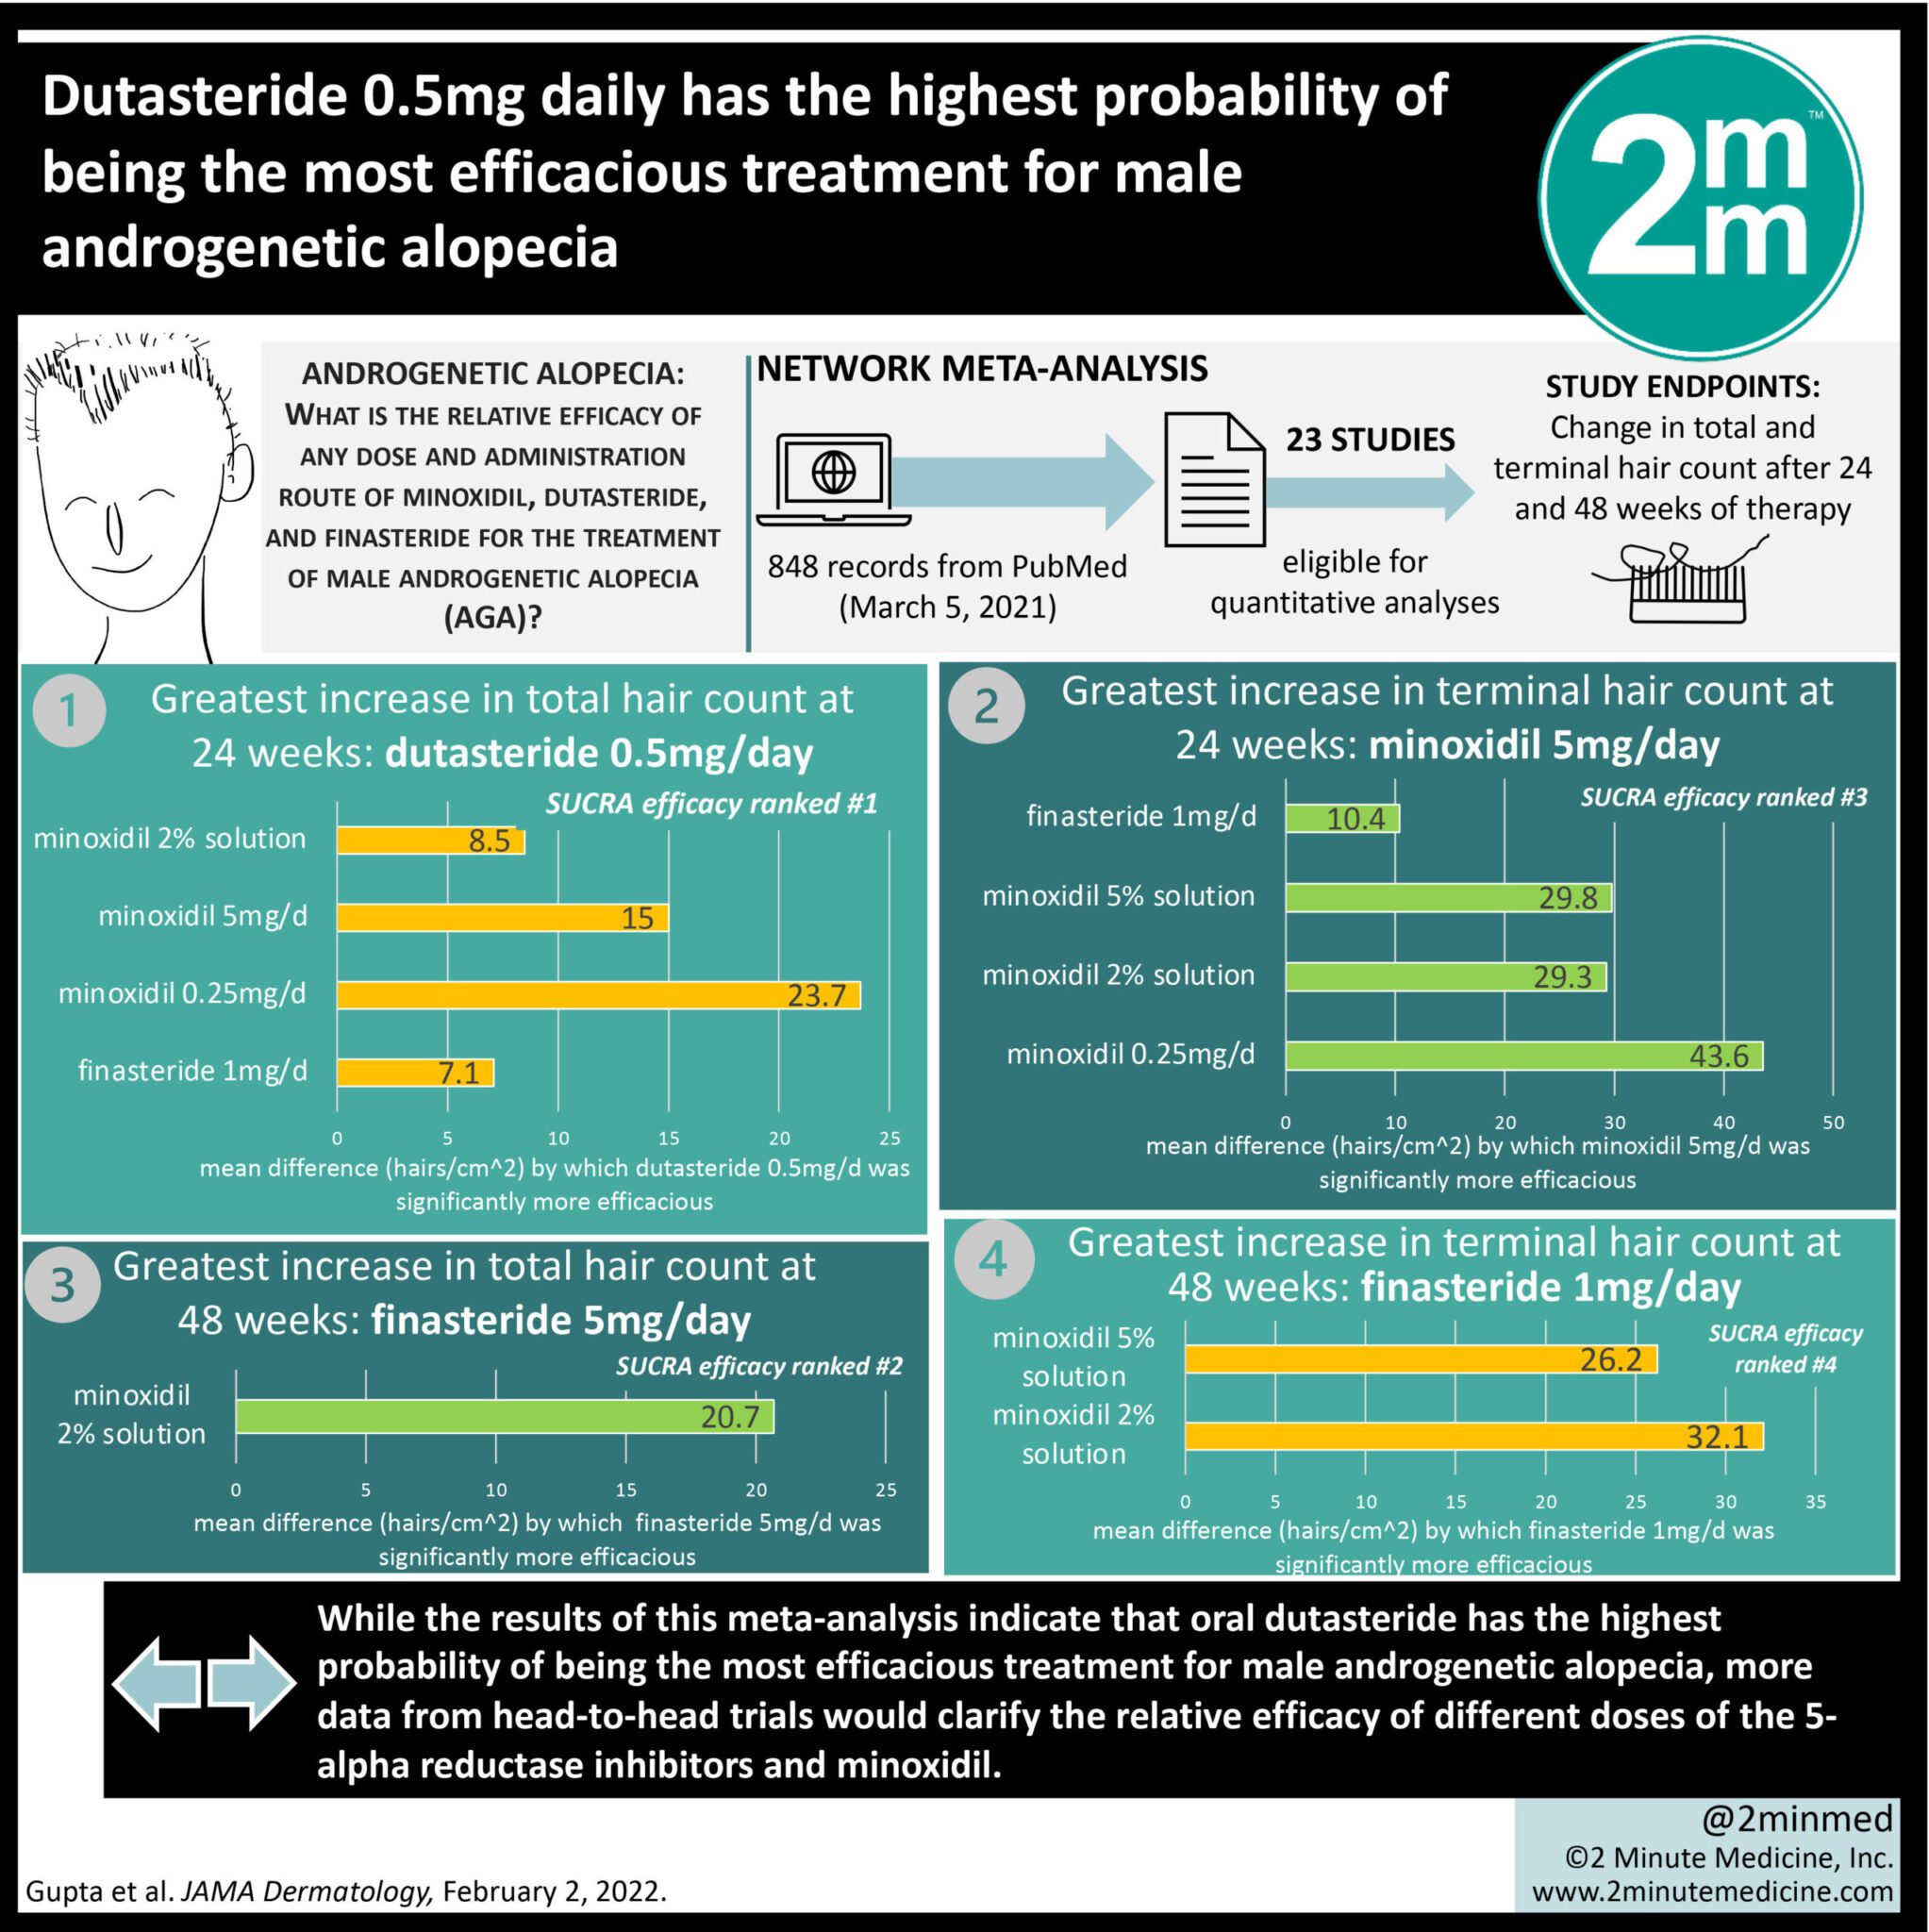 VisualAbstract: Dutasteride  daily has the highest probability of  being the most efficacious treatment for male androgenetic alopecia | 2  Minute Medicine